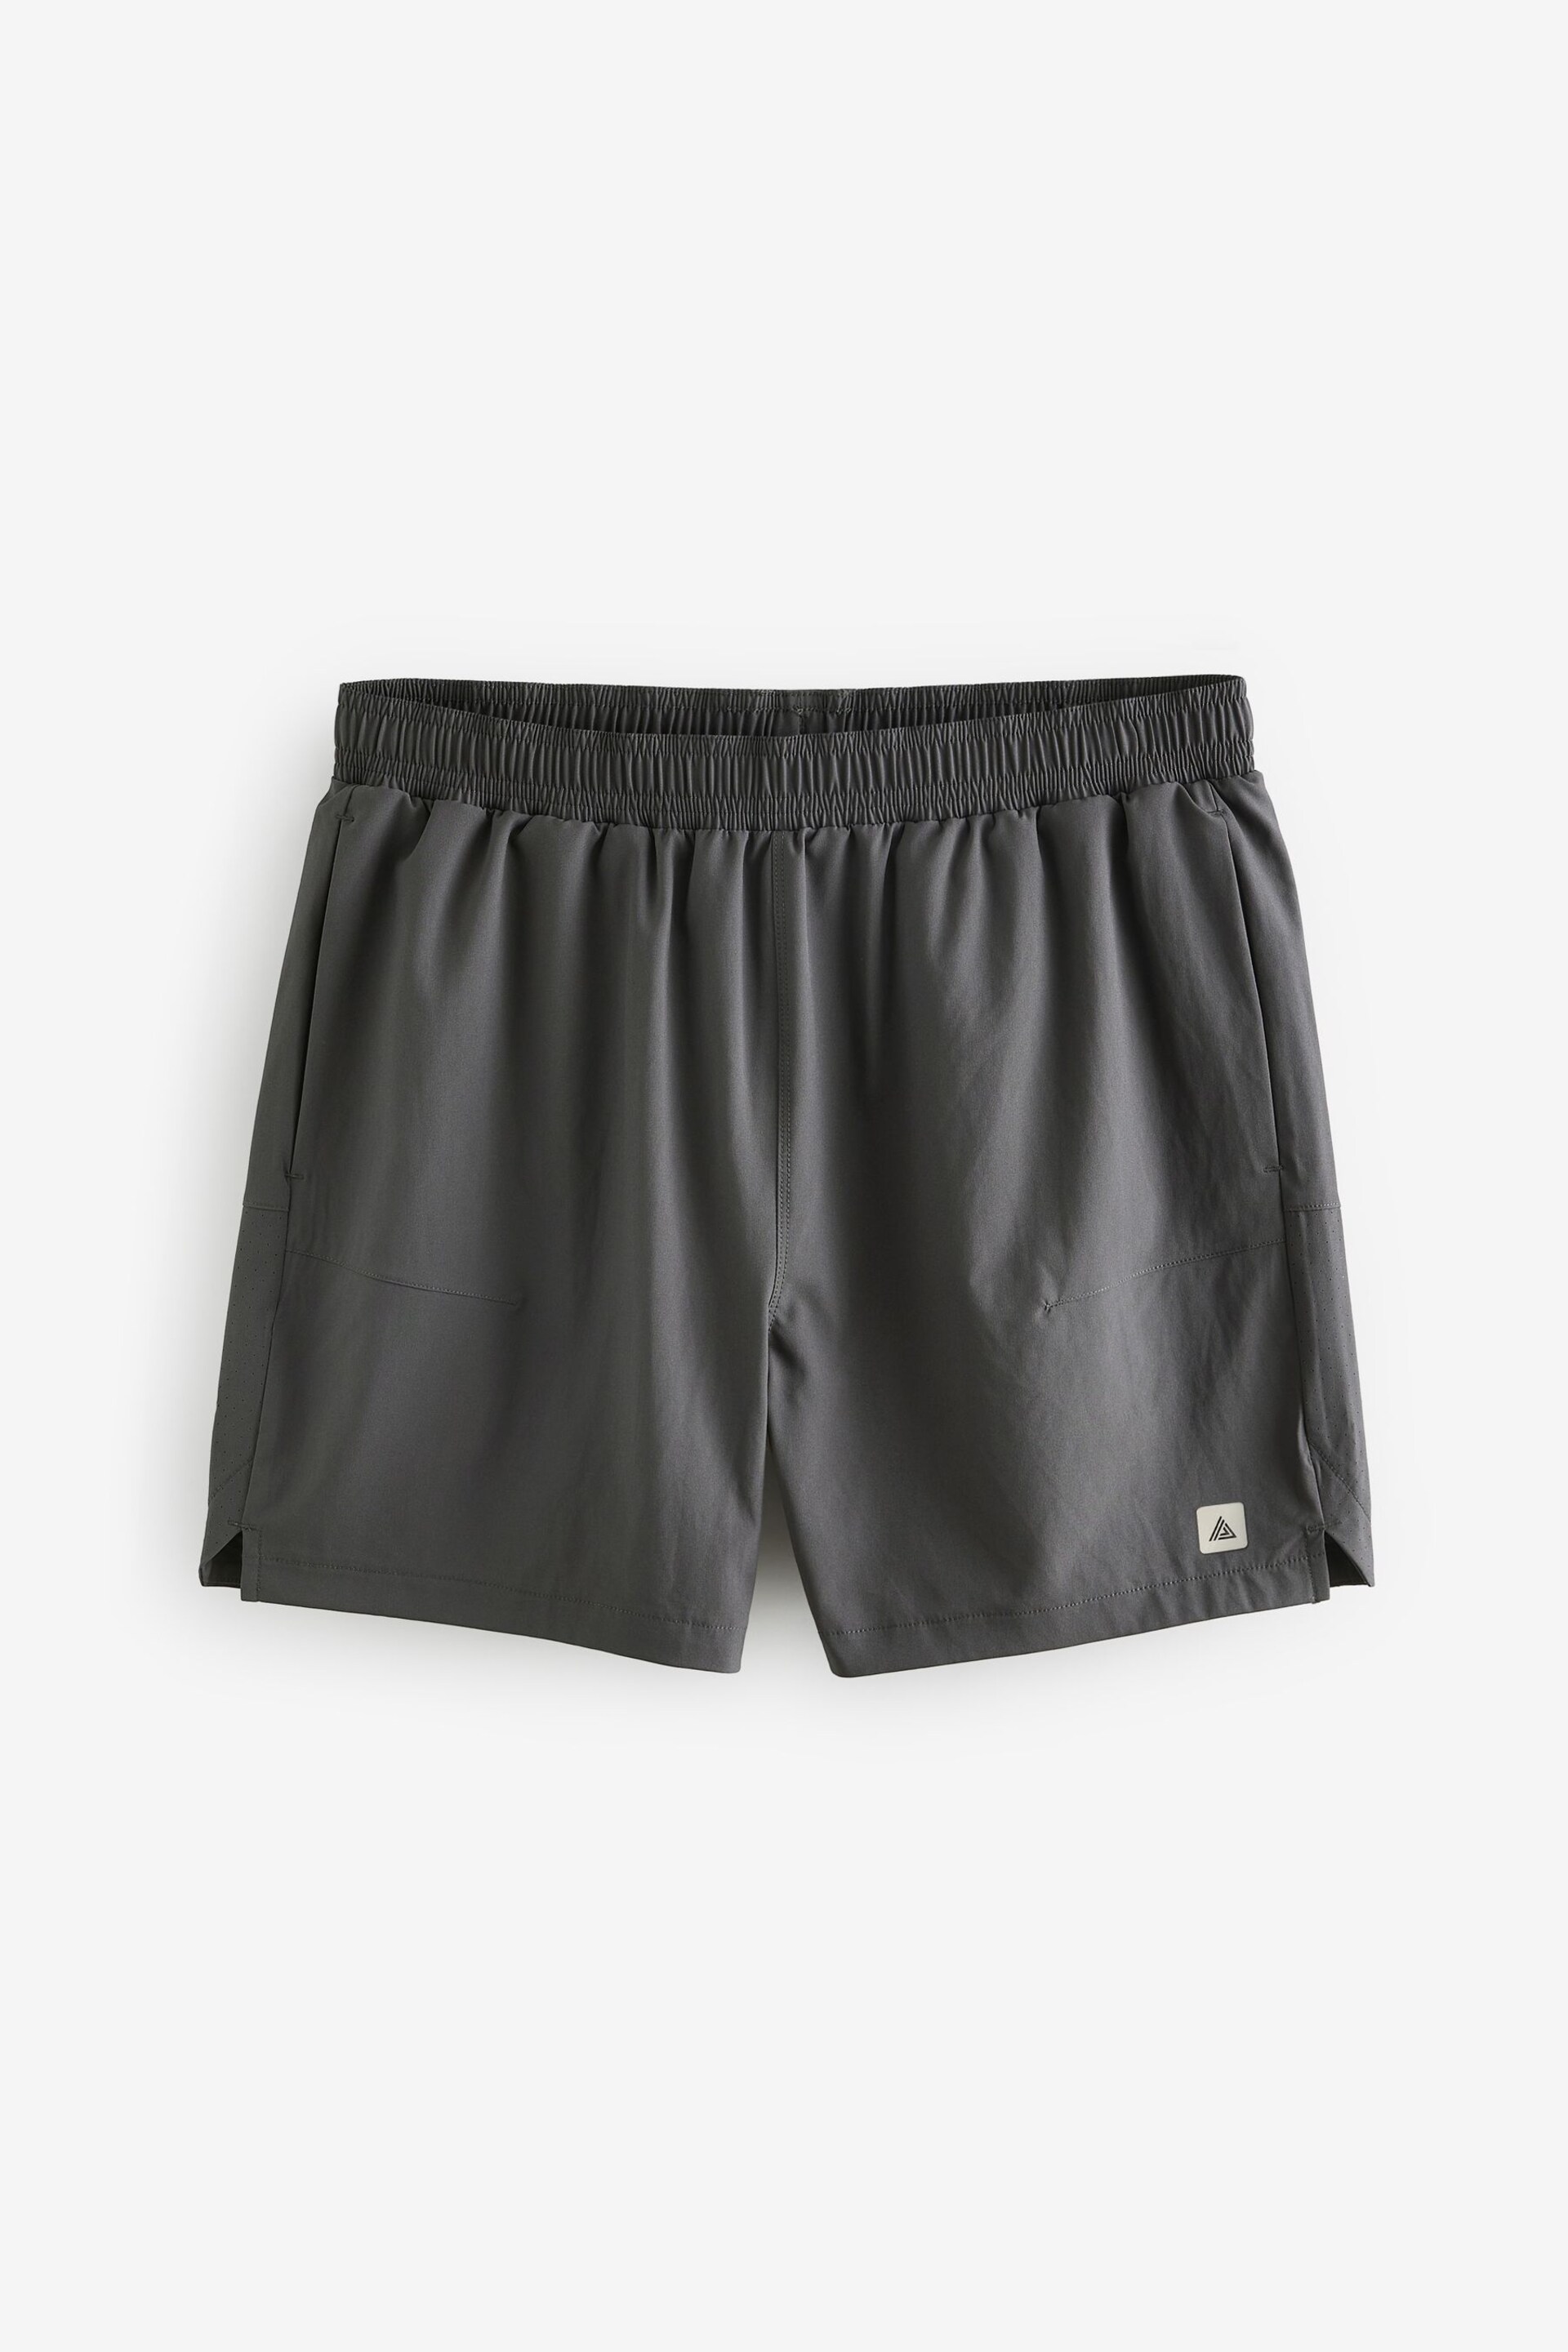 Slate Grey 5 Inch Active Gym Sports Shorts - Image 4 of 7